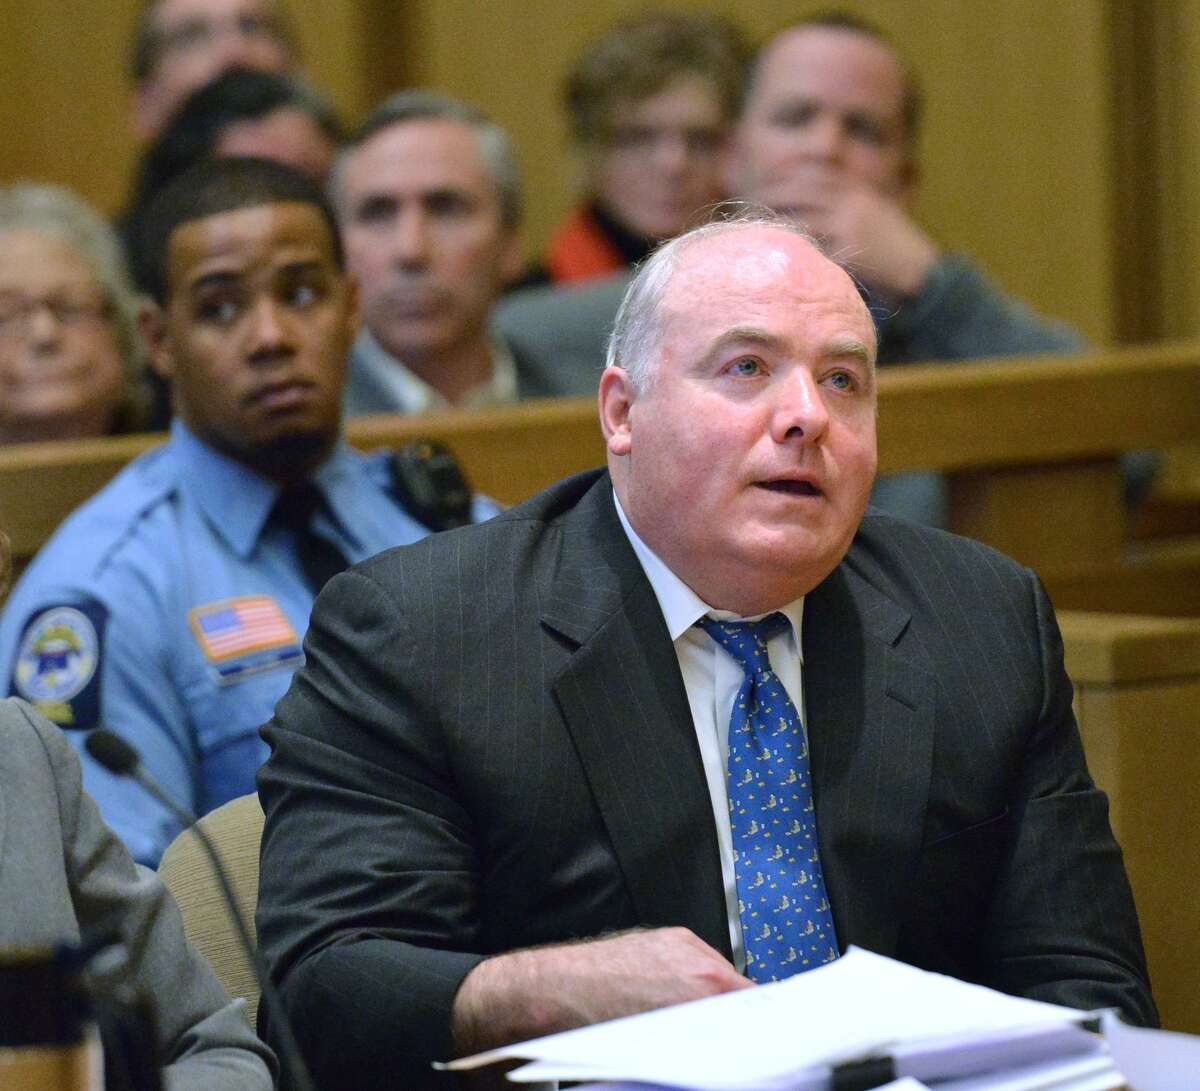 Michael Skakel reacts to being granted bail during his hearing at Stamford Superior Court, in Stamford, Conn., Thursday, Nov. 21, 2013. Skakel will be released on bail after receiving a new trial for the 1975 murder of his Greenwich, Conn., neighbor, Martha Moxley, which he was convicted of in 2002.